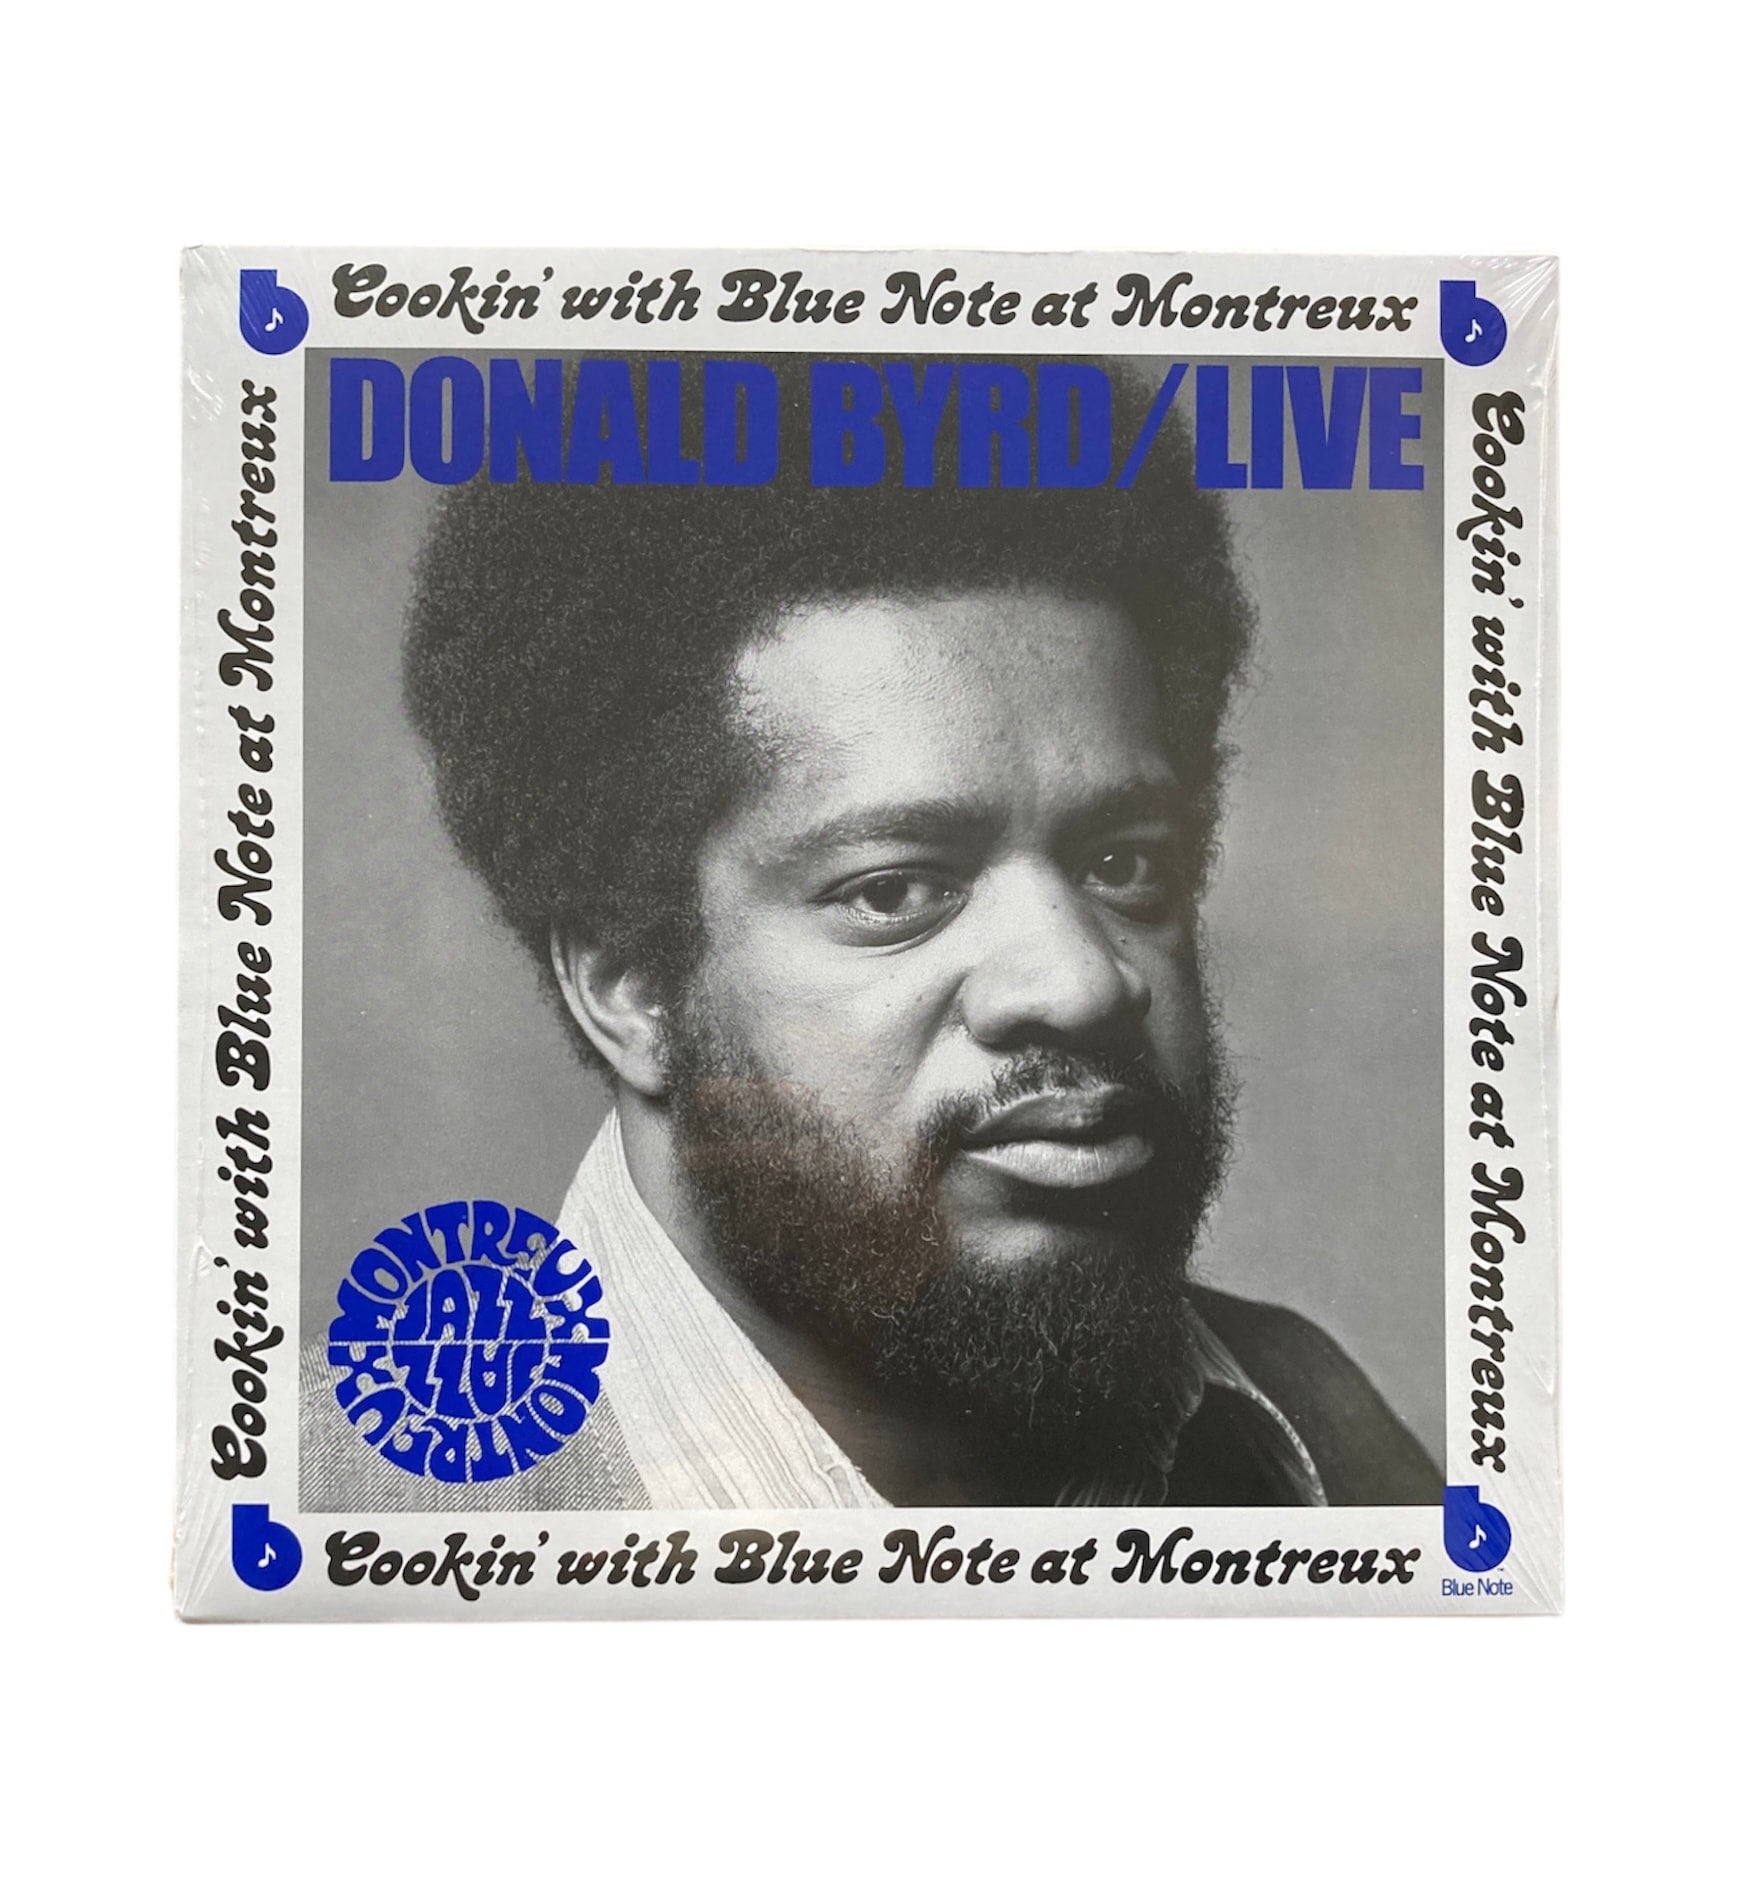 Donald Byrd – Live (Cookin' With Blue Note At Montreux)